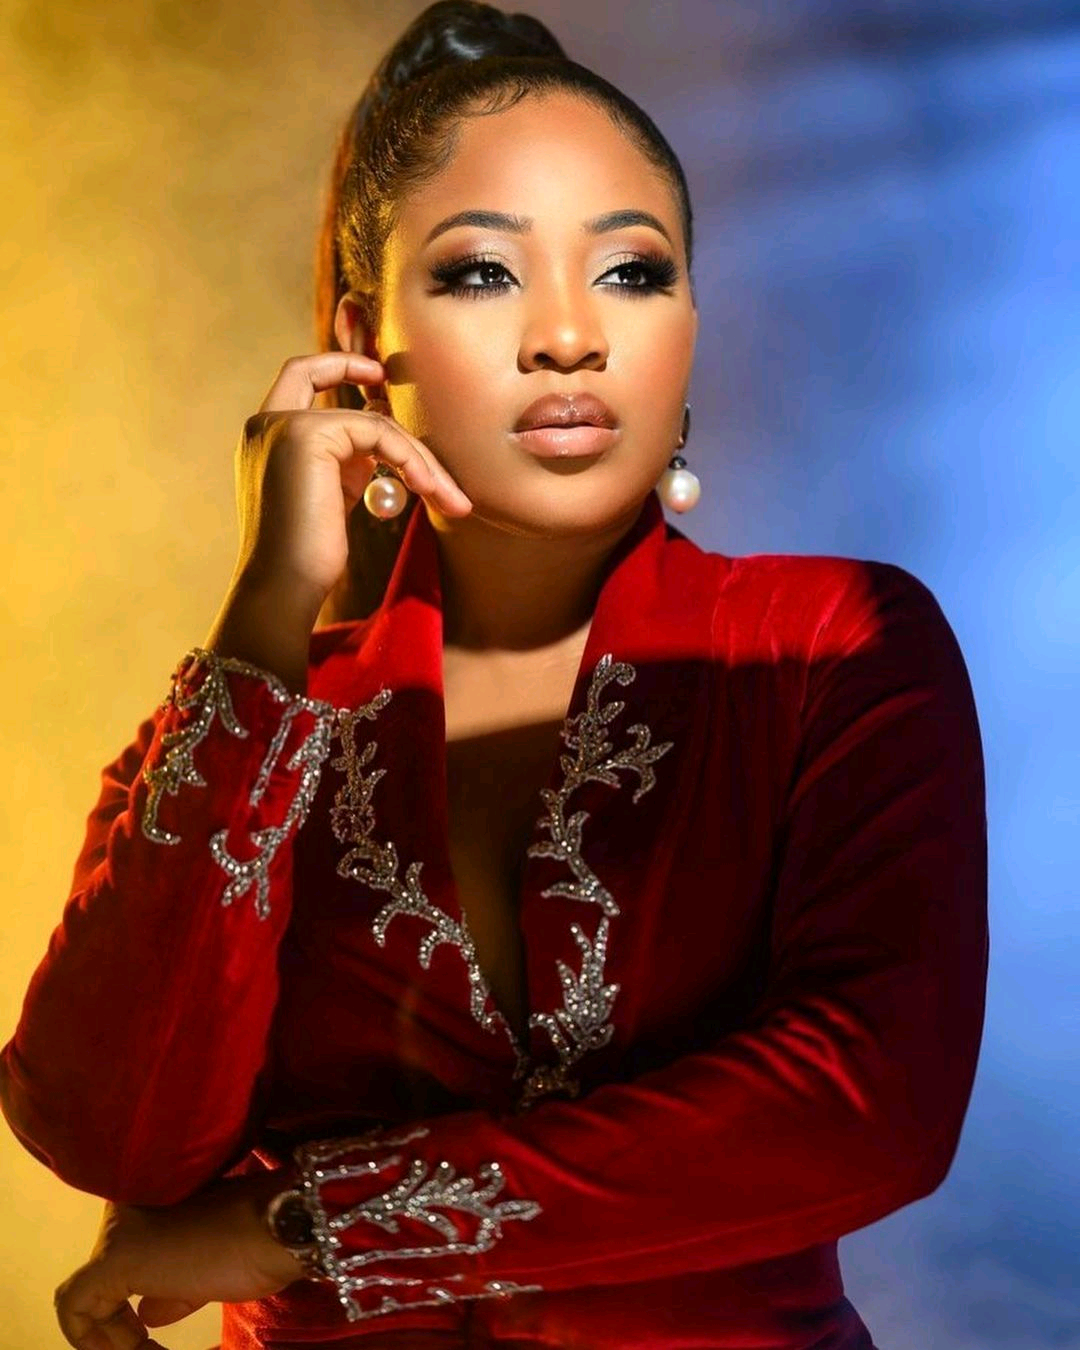 'I Will Not Be Paying On A Date,' BBNaija’s Erica